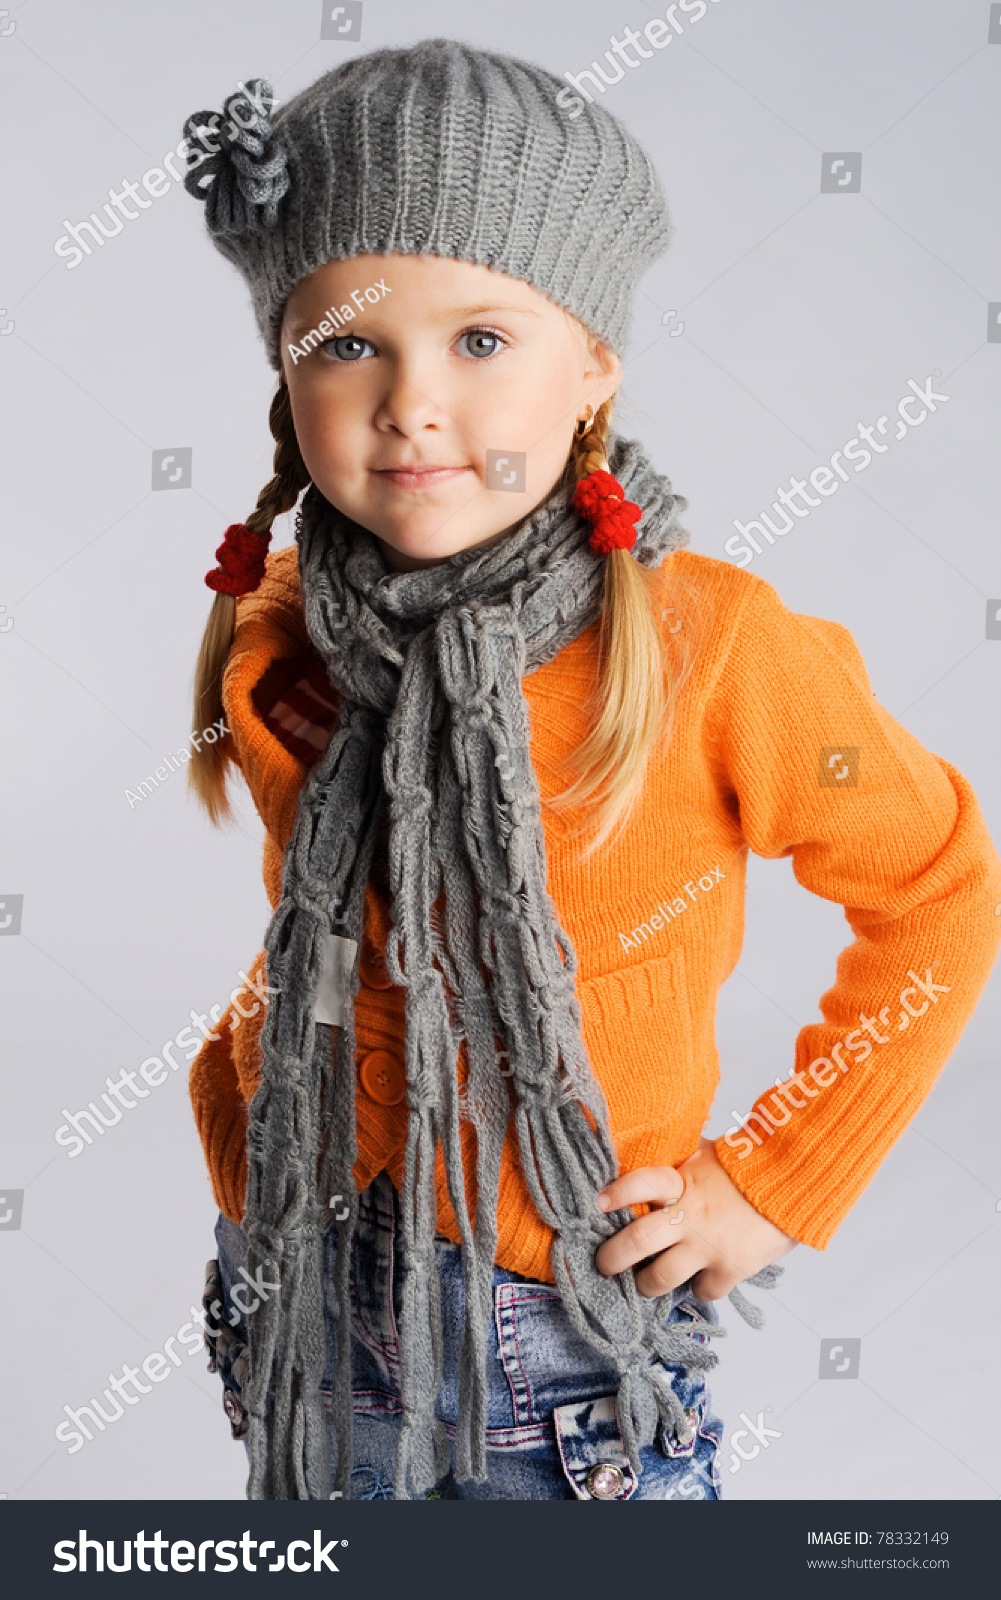 Little Fashionable Girl In Warm Clothes Stock Photo 78332149 : Shutterstock